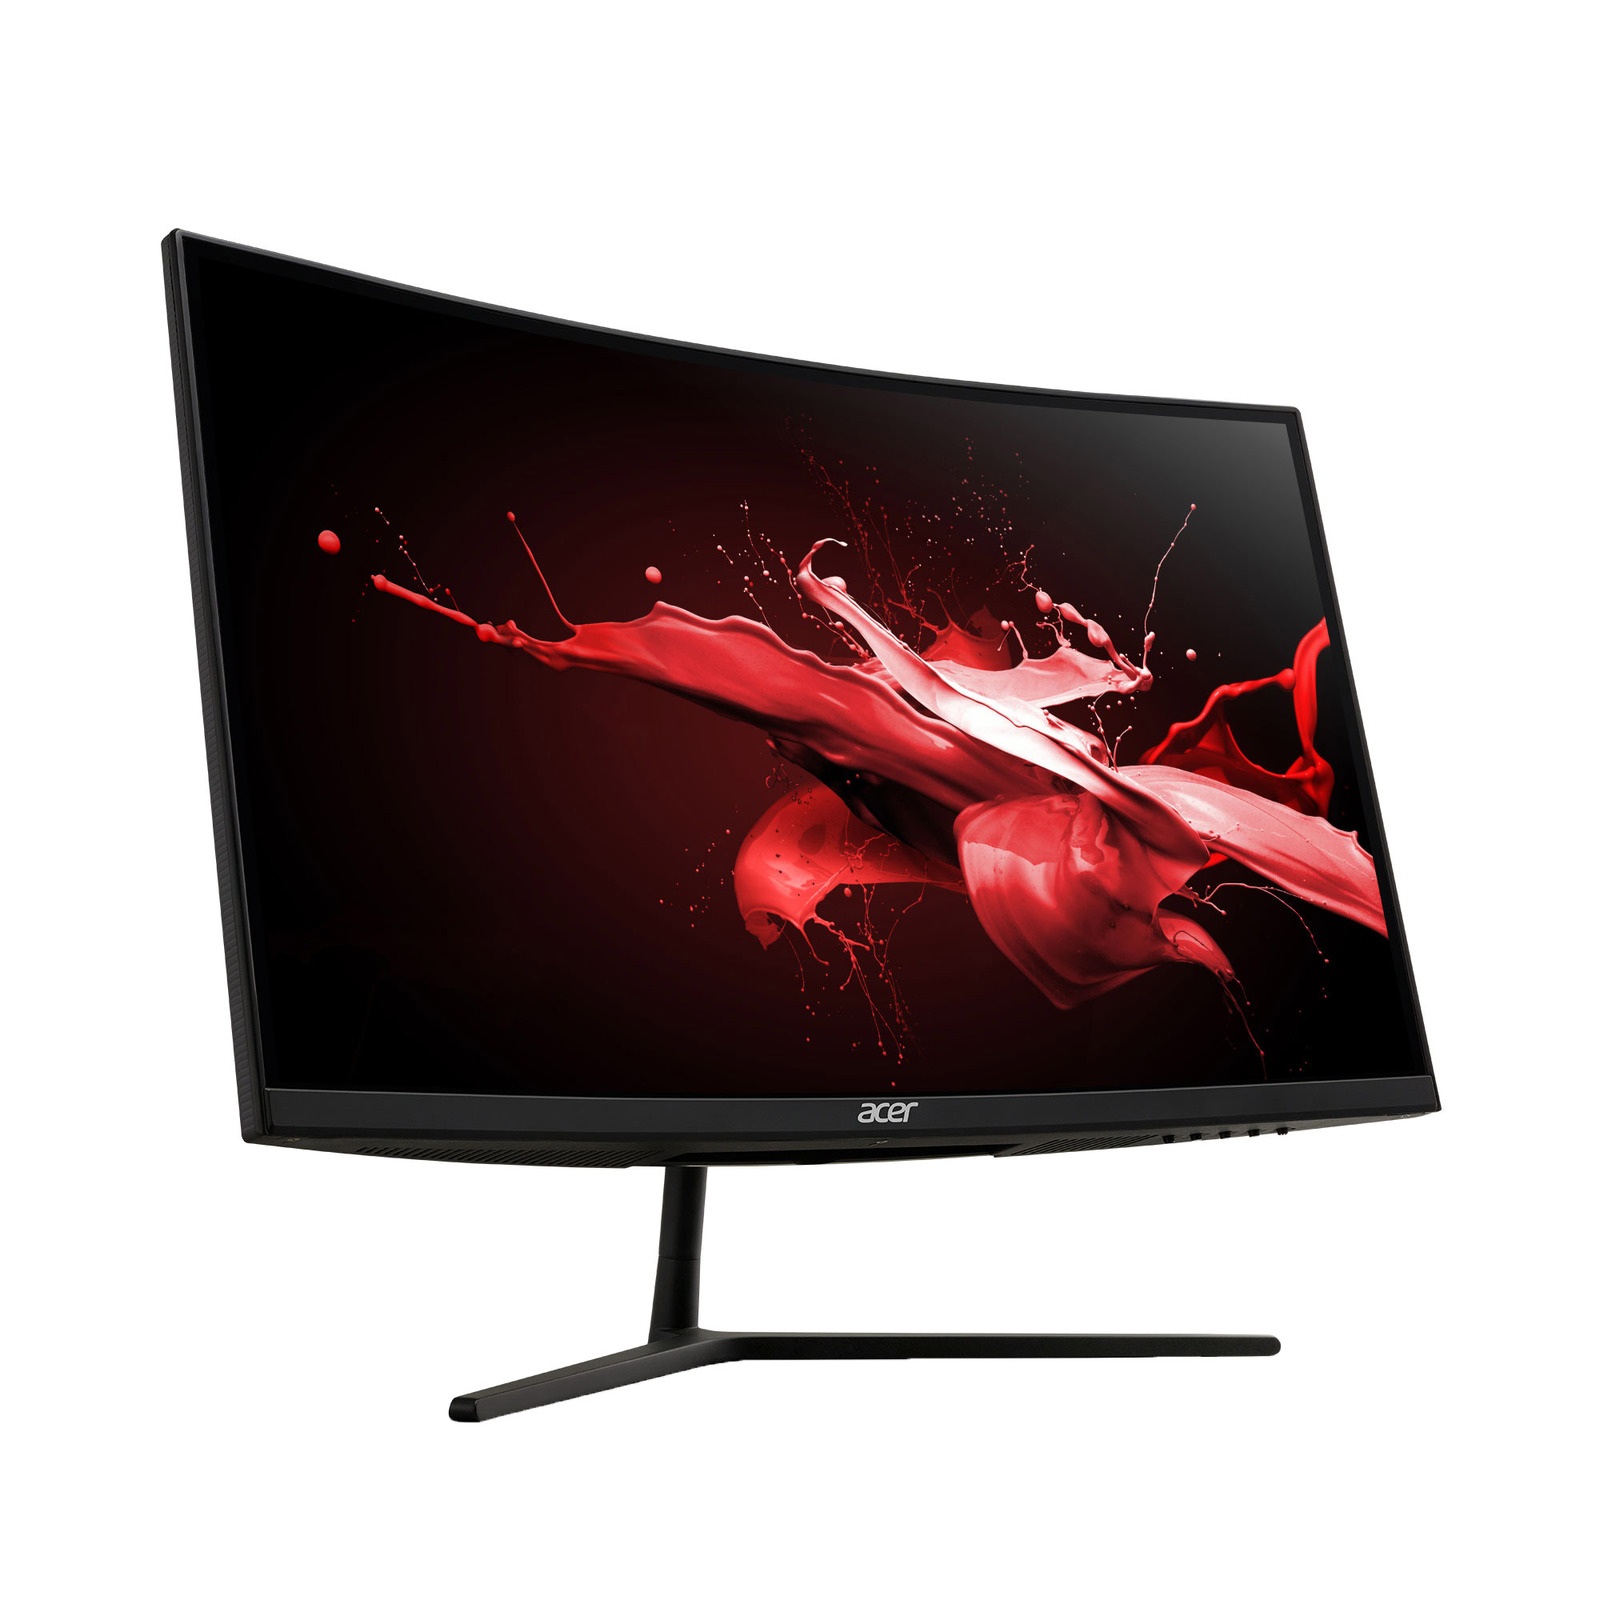 Acer 32” Class WQHD Curved Gaming Monitor, 165Hz, 2560 x 1440, AMD FreeSync, NEW